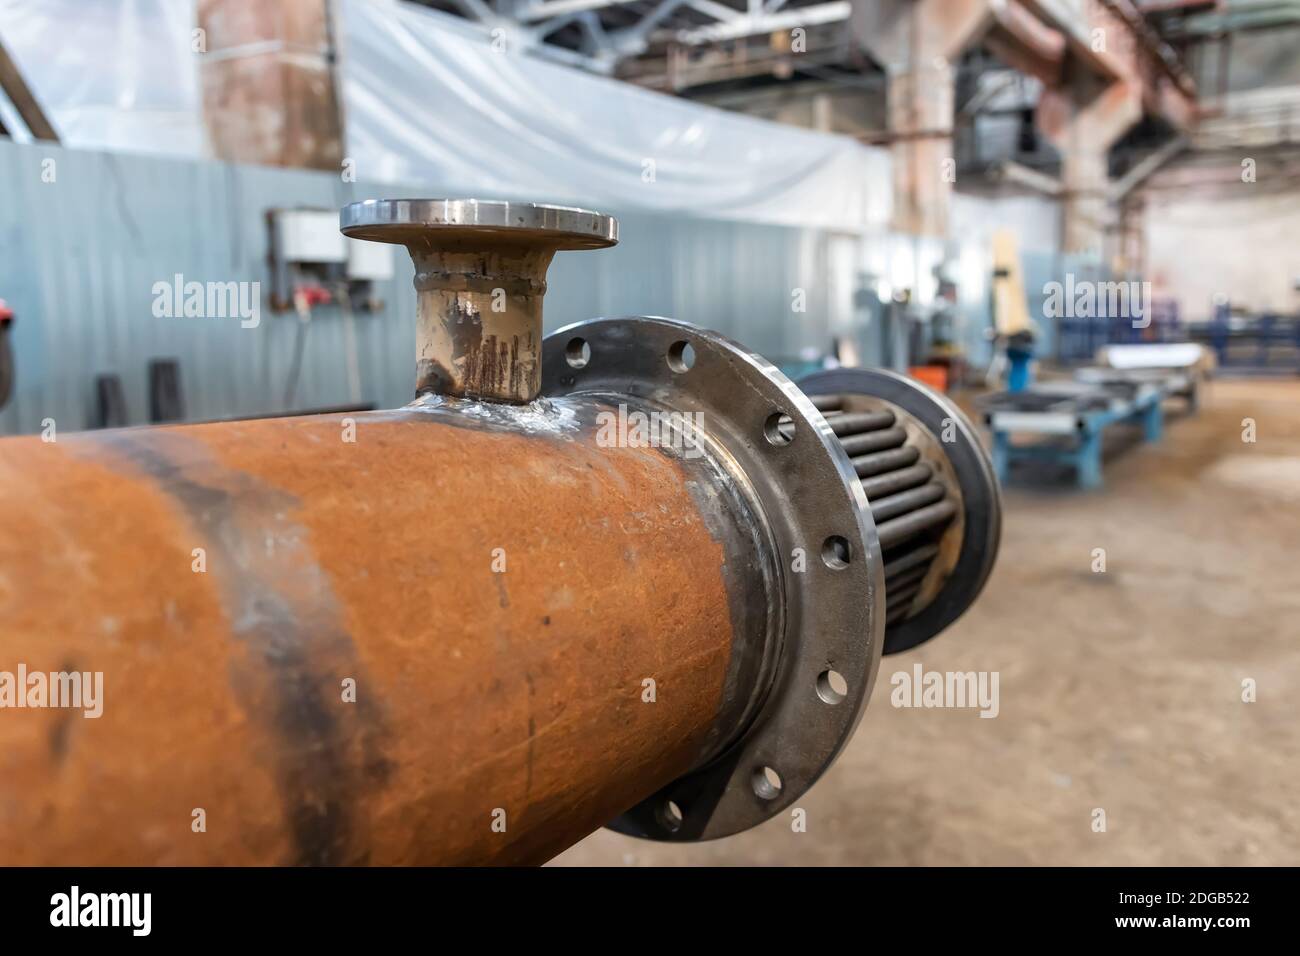 Manufacture of a new heat exchanger with tube bundle Stock Photo